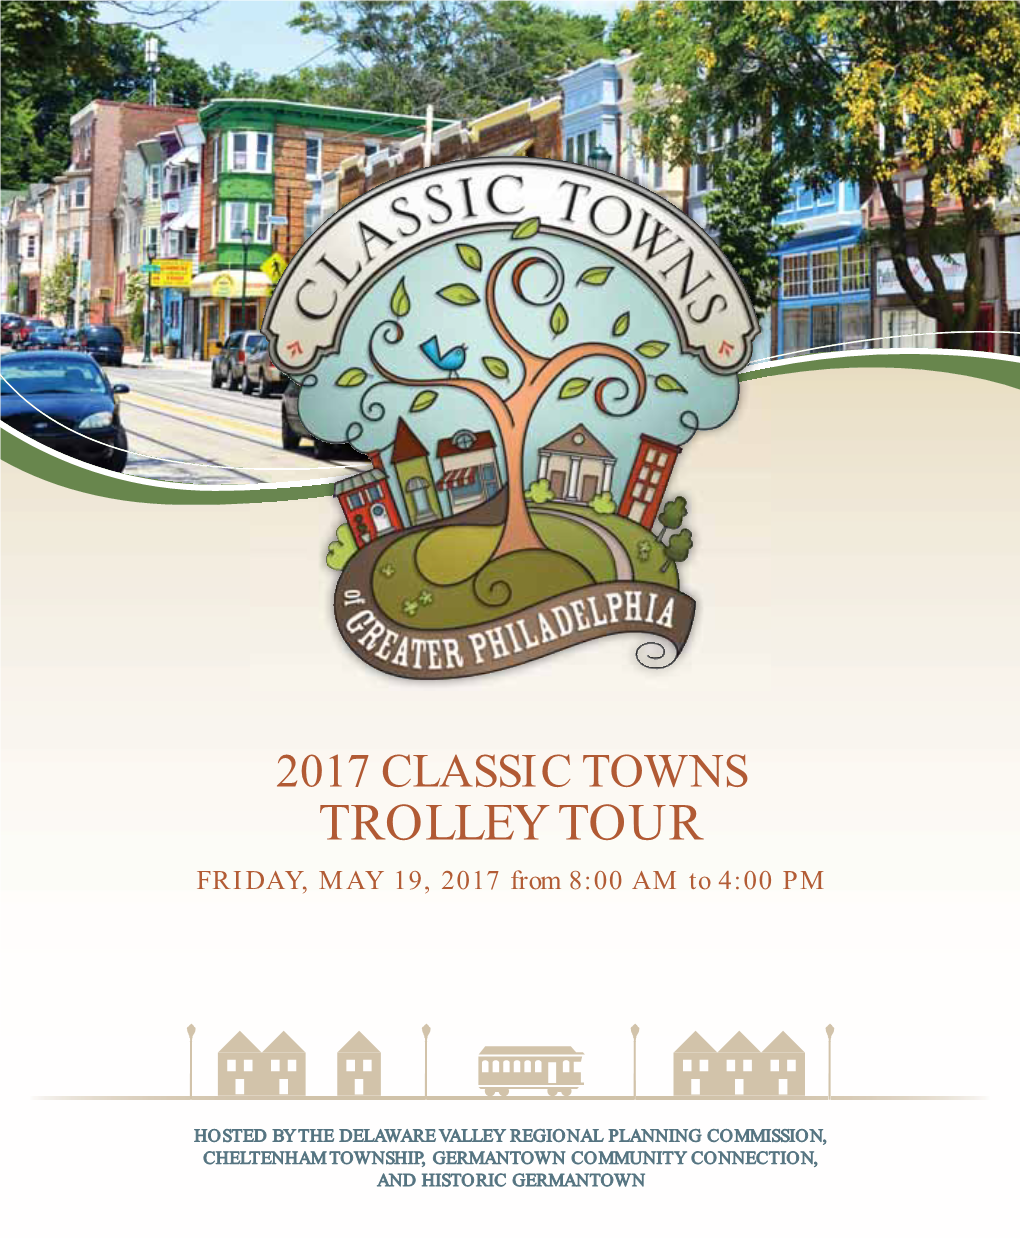 TROLLEY TOUR FRIDAY, MAY 19, 2017 from 8:00 AM to 4:00 PM